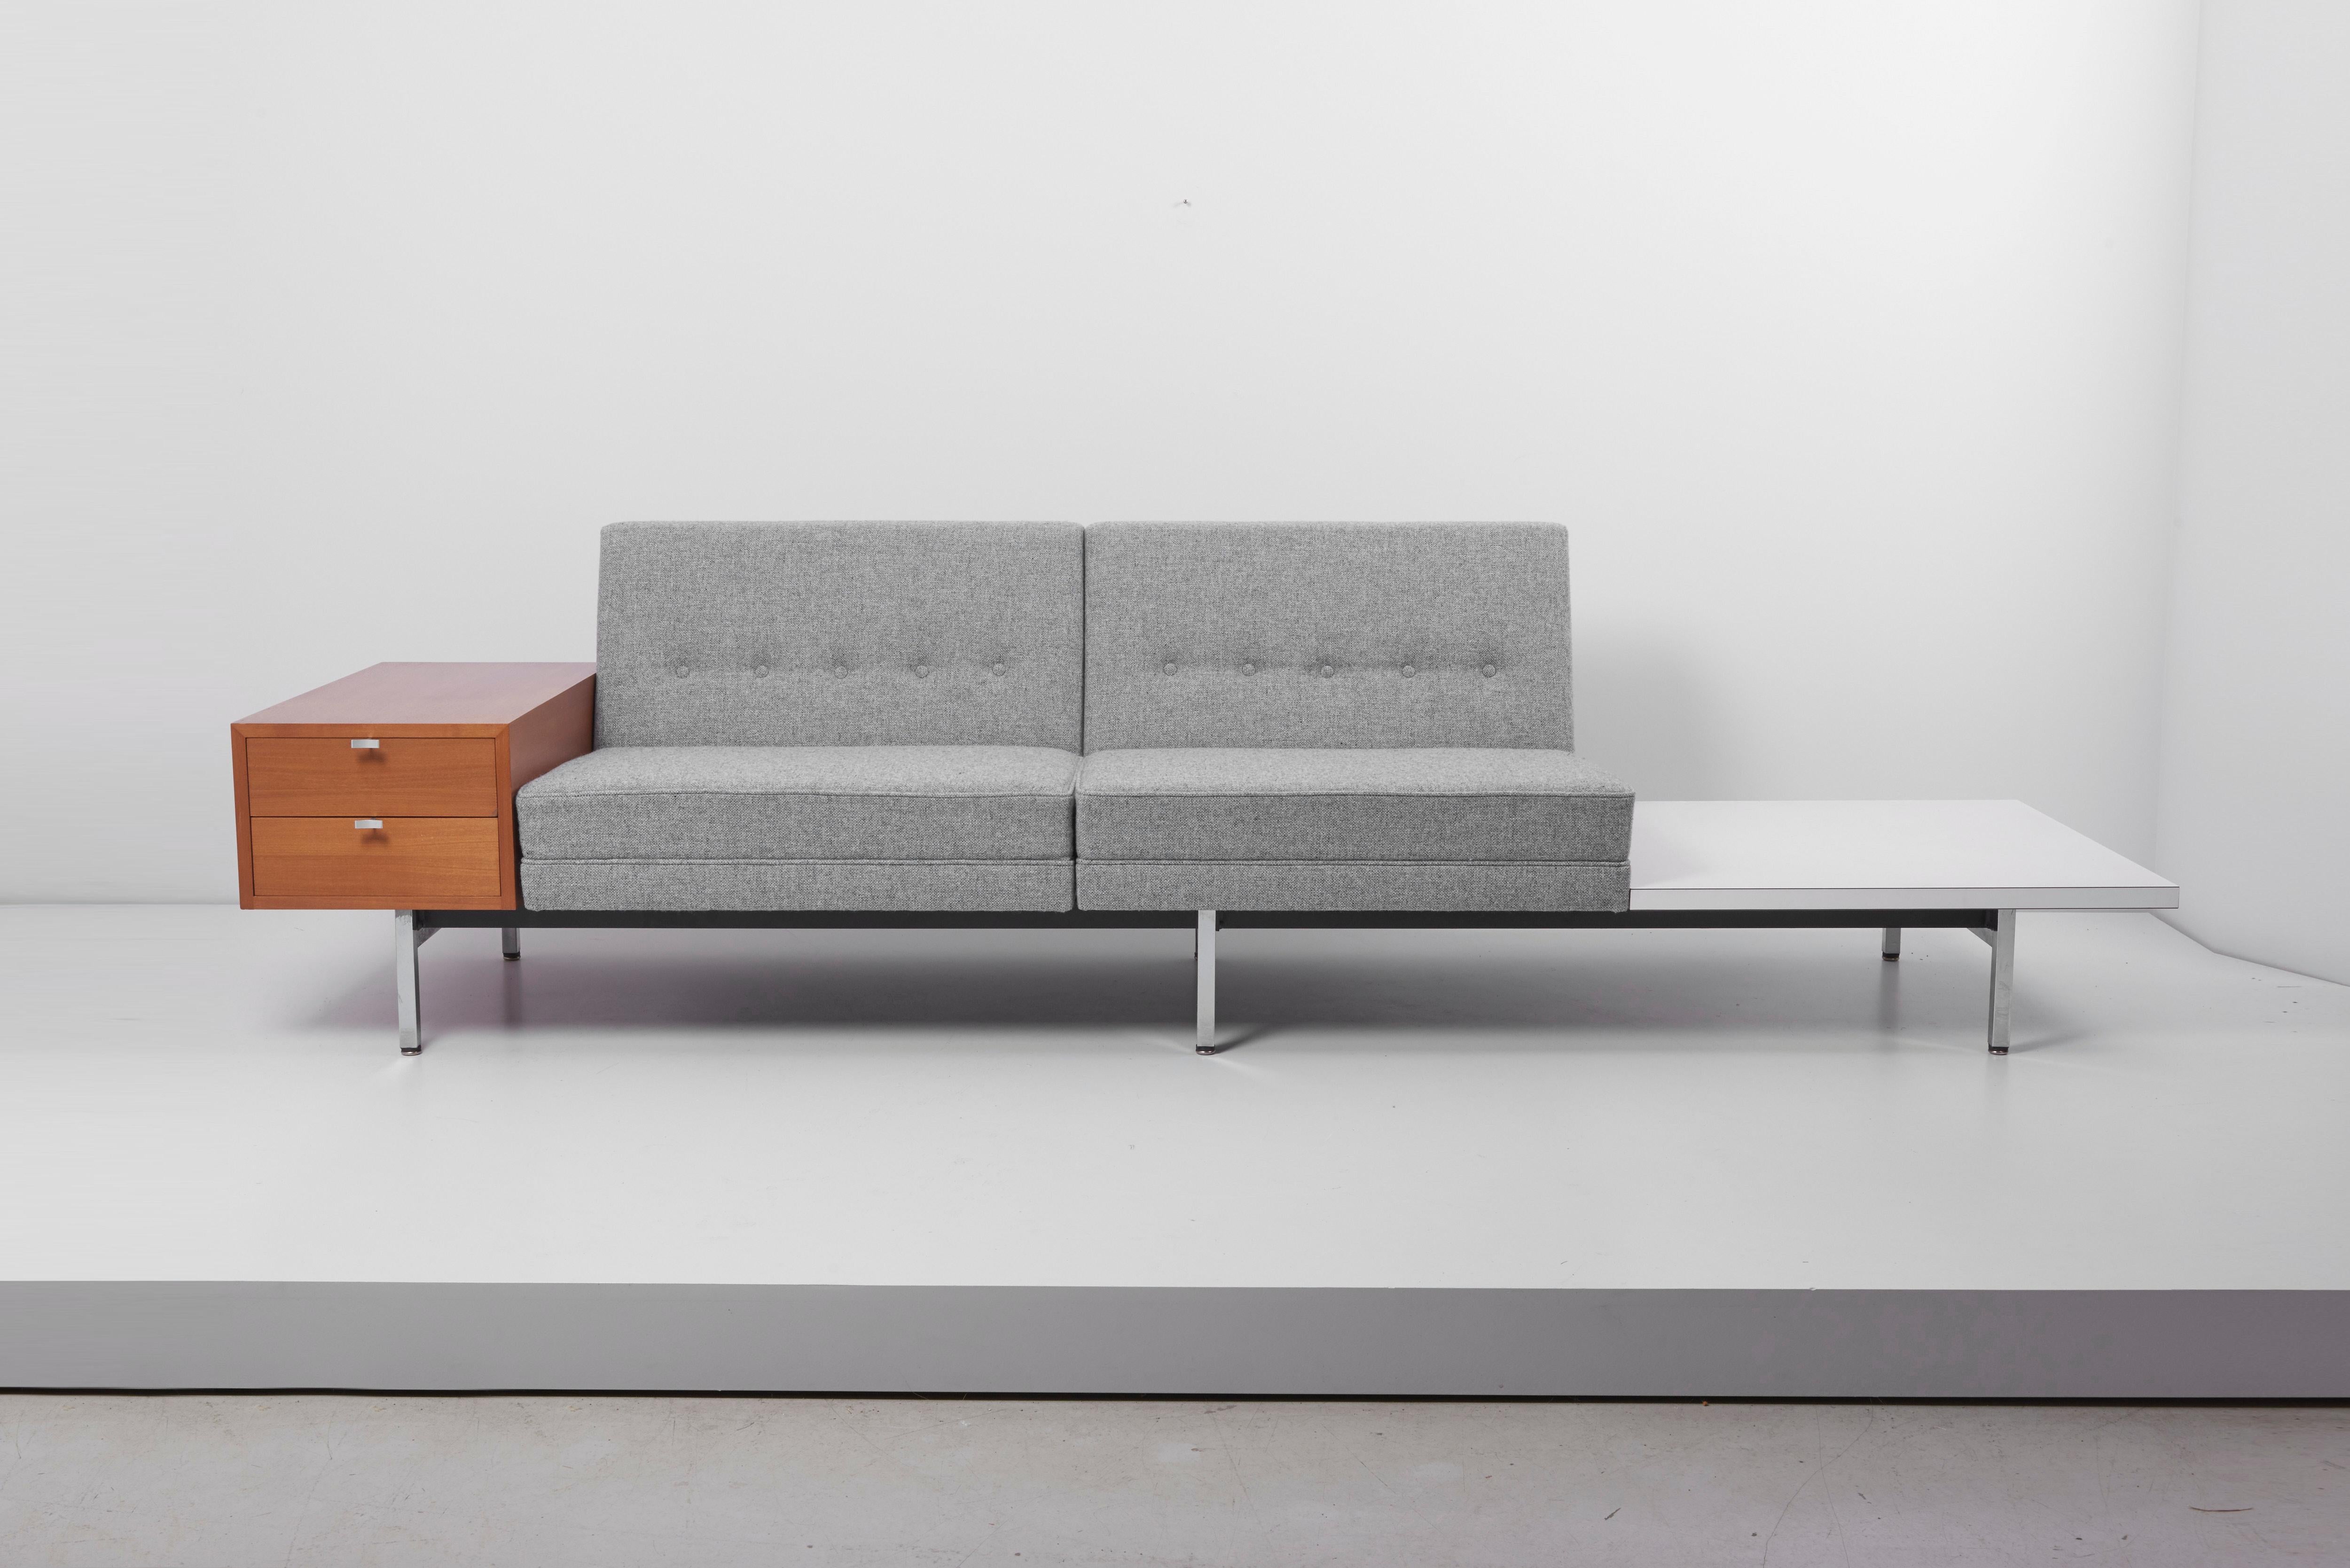 Two bases, six seats in total, a square table and a two-drawer element. All pieces can be placed modular - the name says it all. Newly upholstered in grey Hallingdal fabric by Kvadrat. The sofas shown in the photos are 230 cm and 270 cm long (90.55